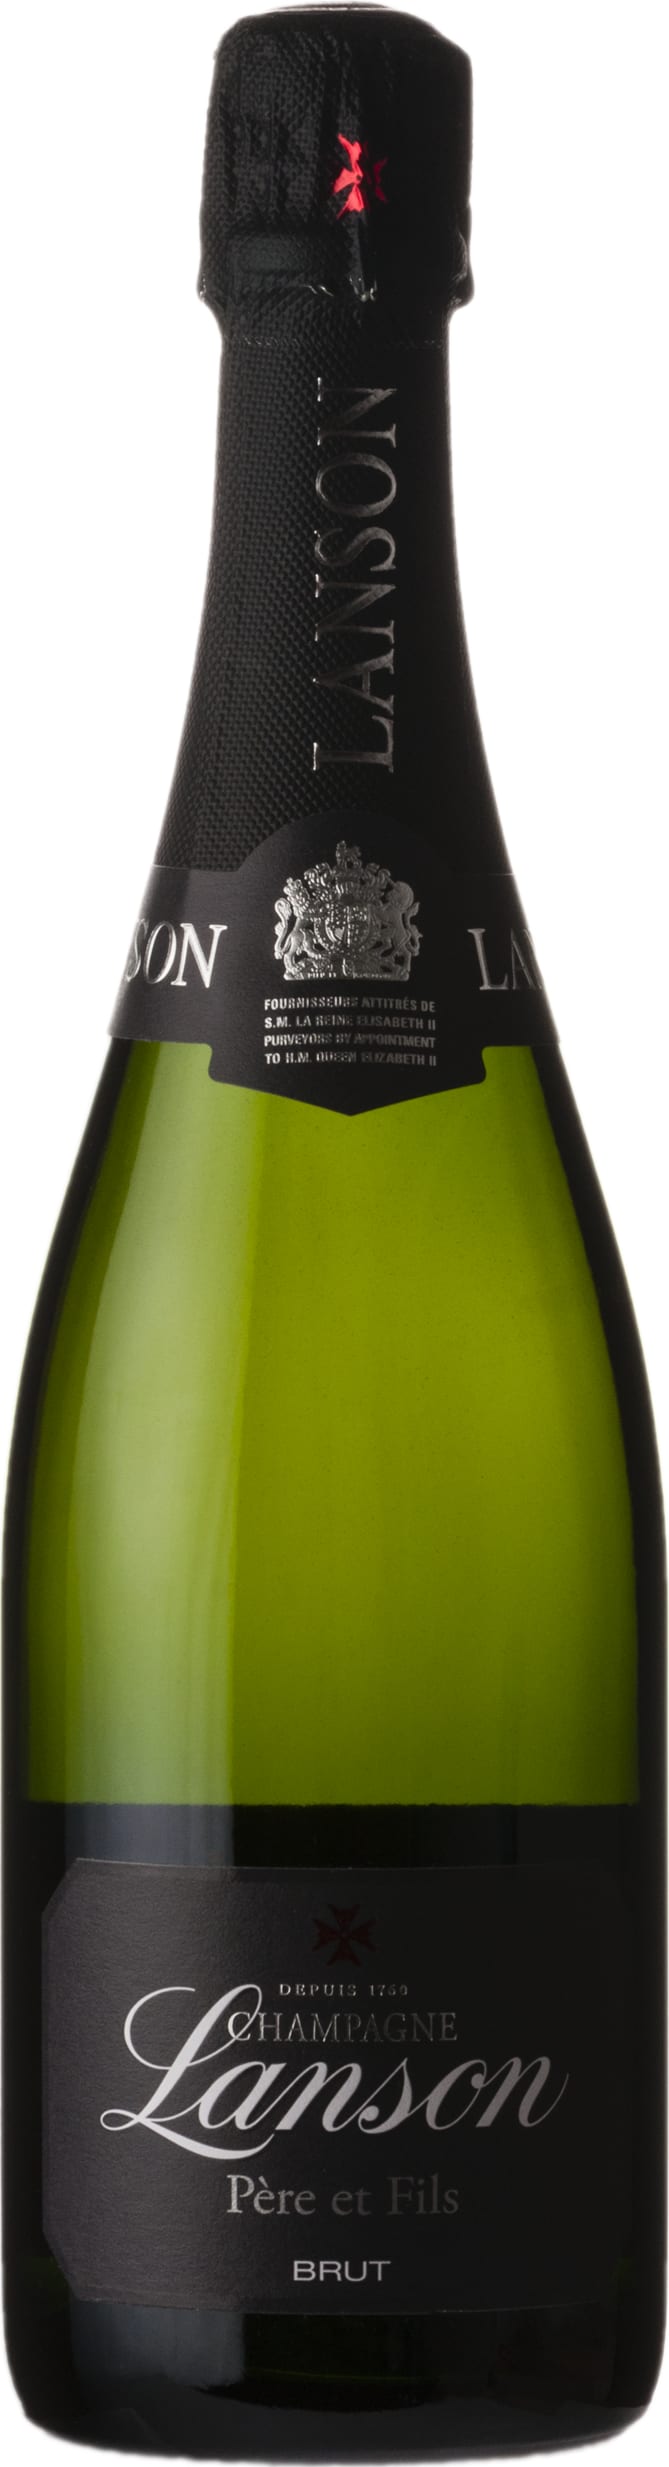 Lanson Pere et Fils 75cl NV - Buy Lanson Wines from GREAT WINES DIRECT wine shop